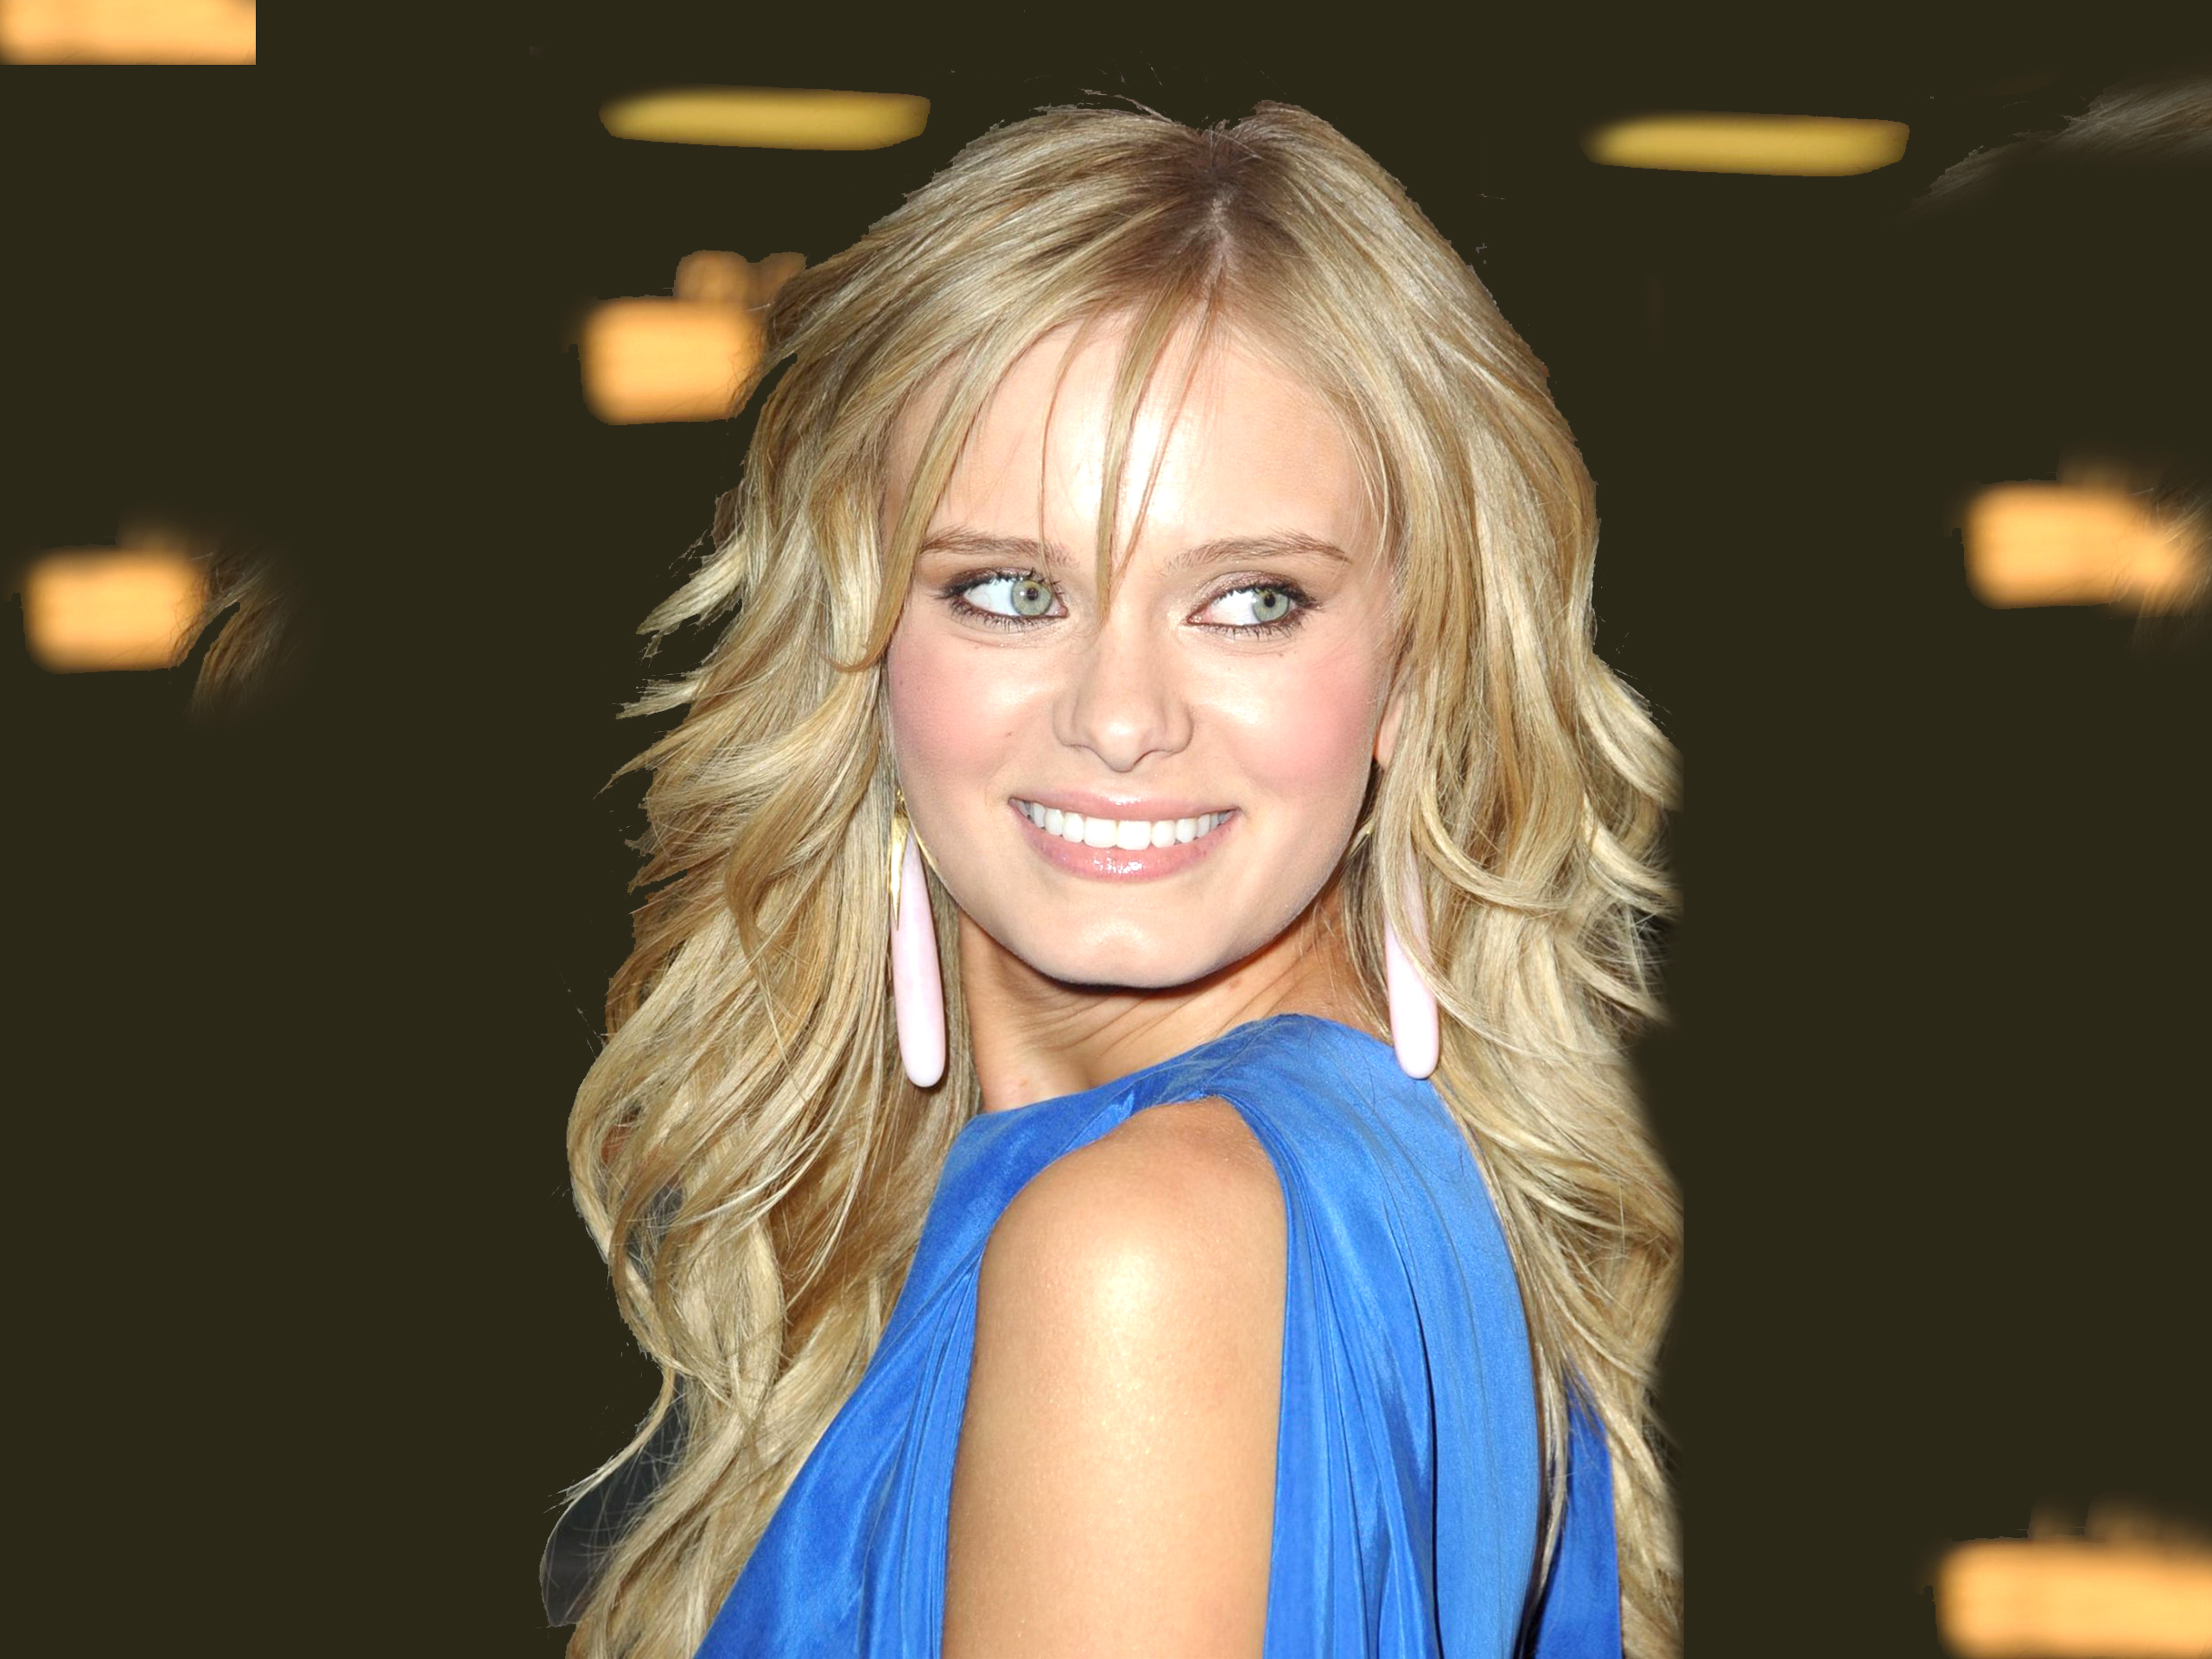 Sara Paxton Wallpaper HD Background Of Your